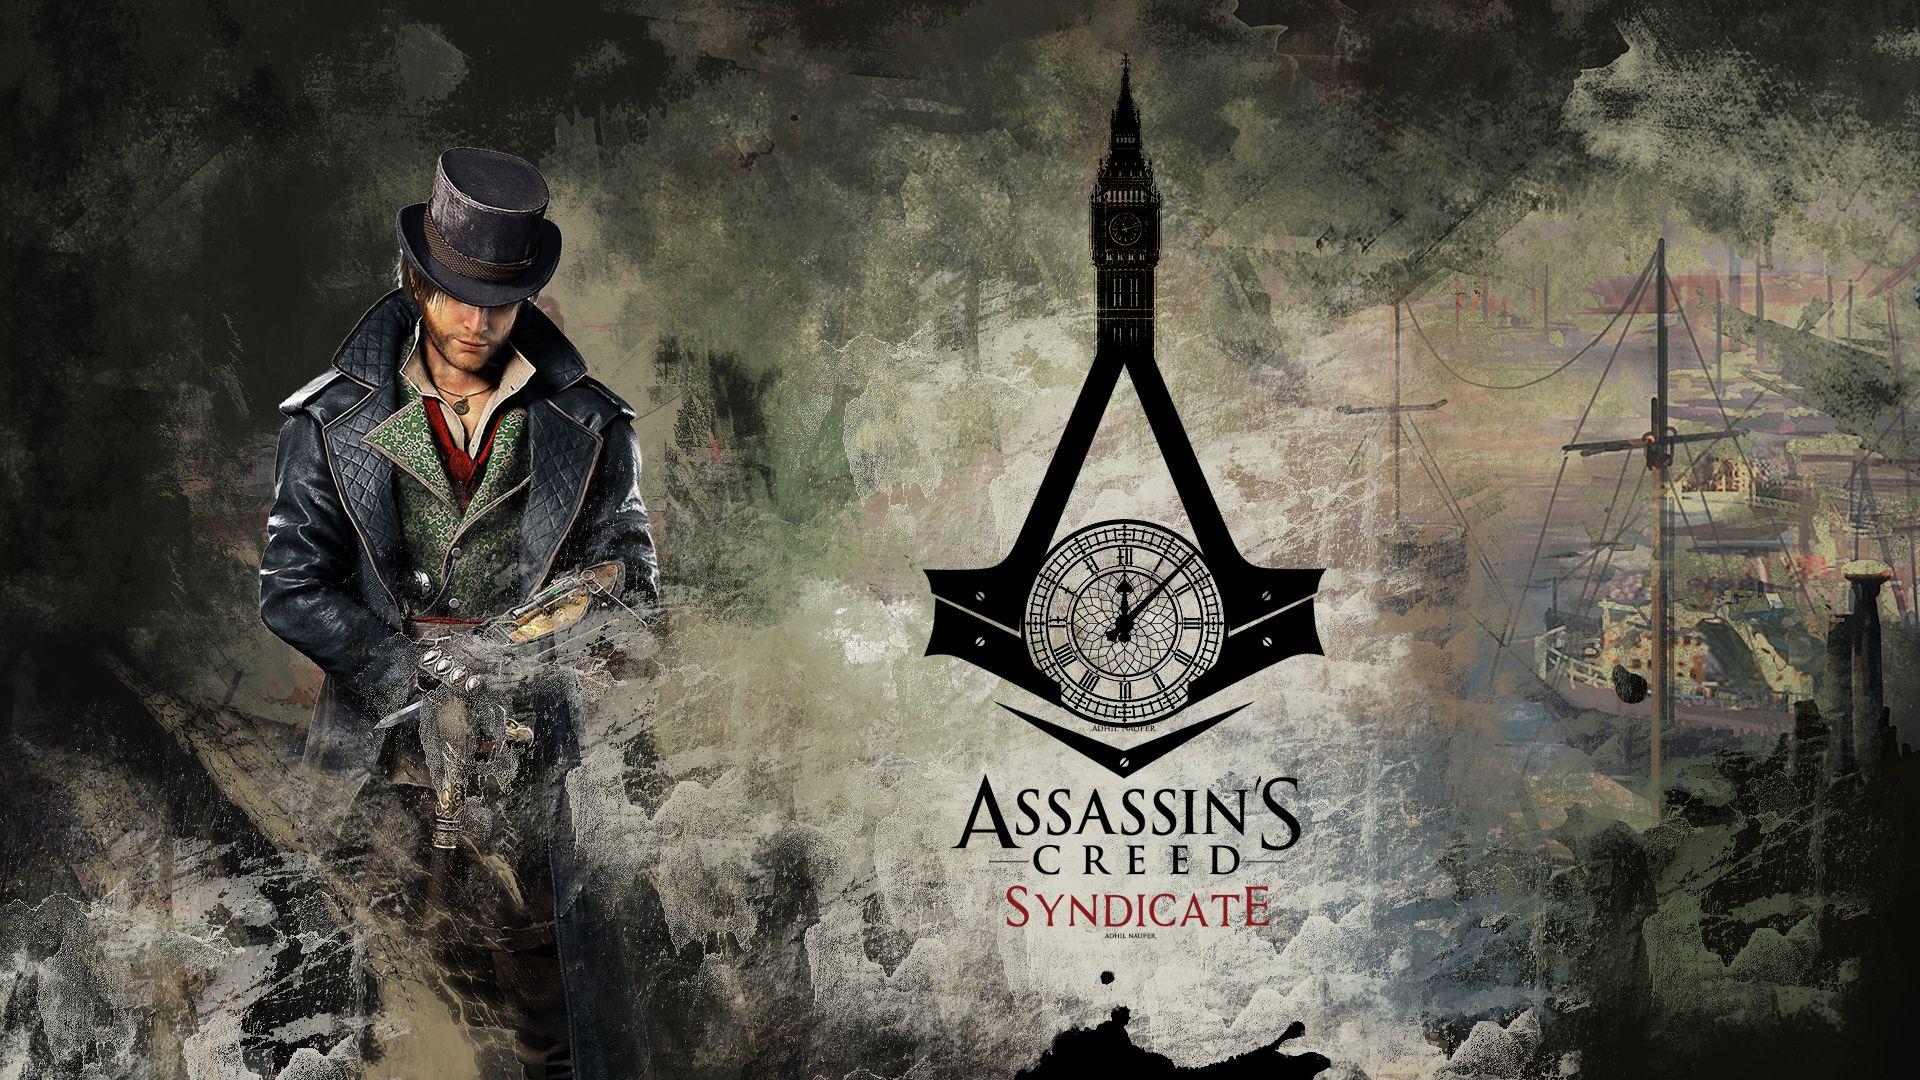 Assassin&creed Syndicate wallpapers Computer Wallpapers, Desktop